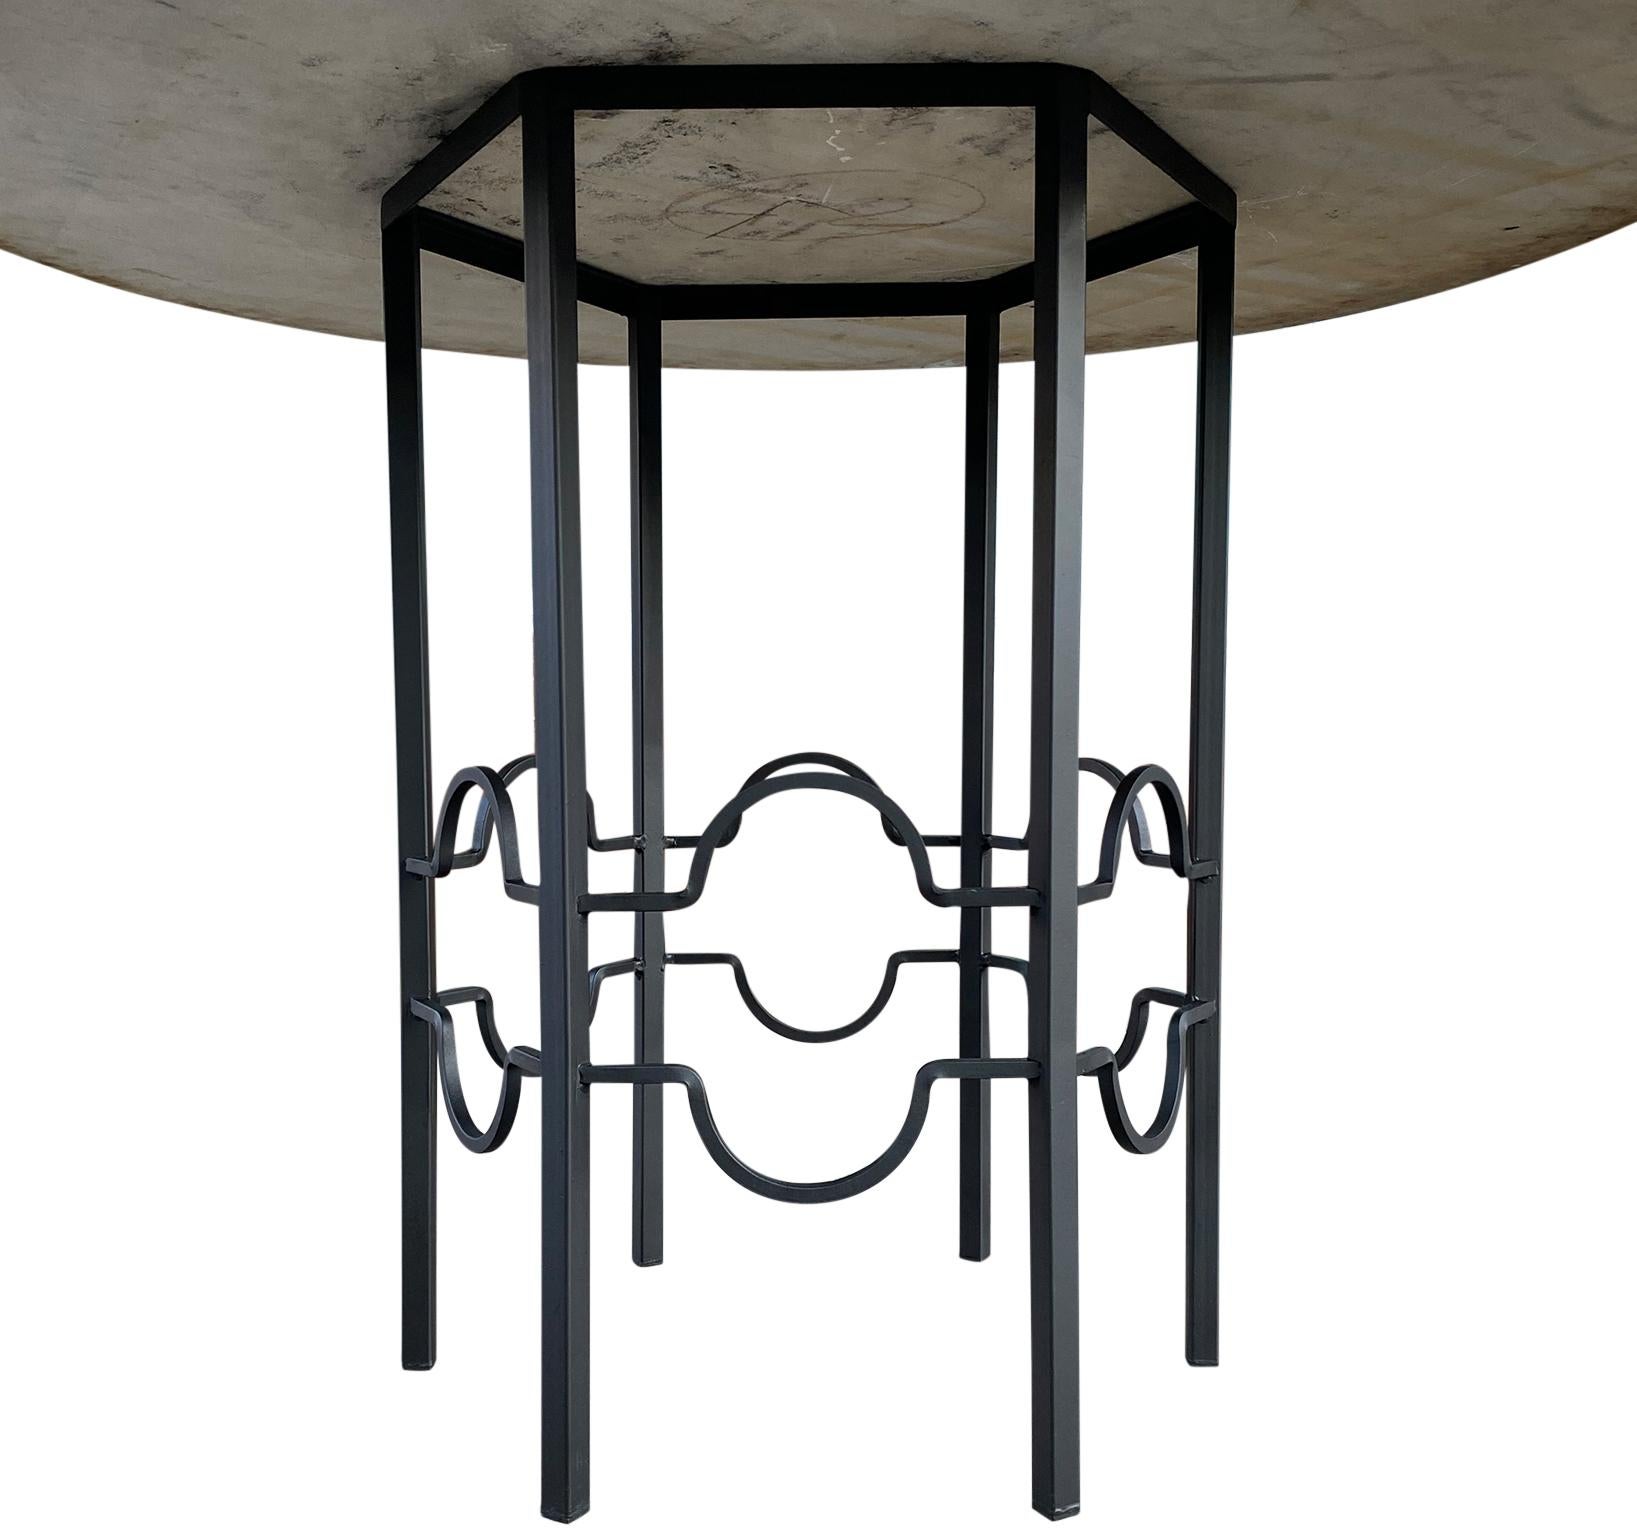 20th Century Midcentury Round Carrara Marble-Top Patio Dining Table with Hexagon Iron Base